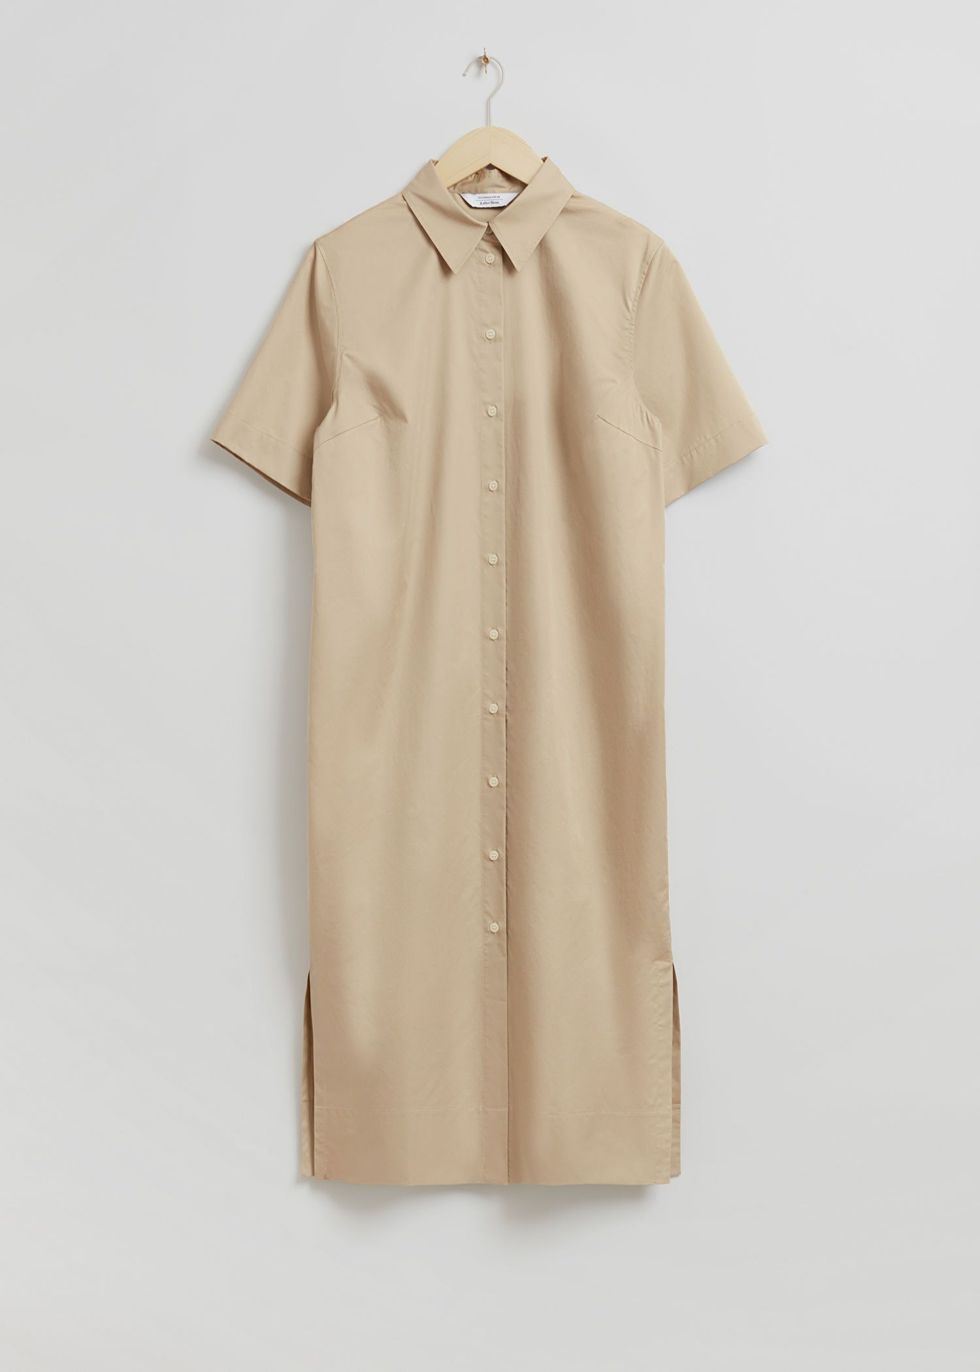 The Shirt Dresses To Turn Your Work Wardrobe Into A Runway Opportunity